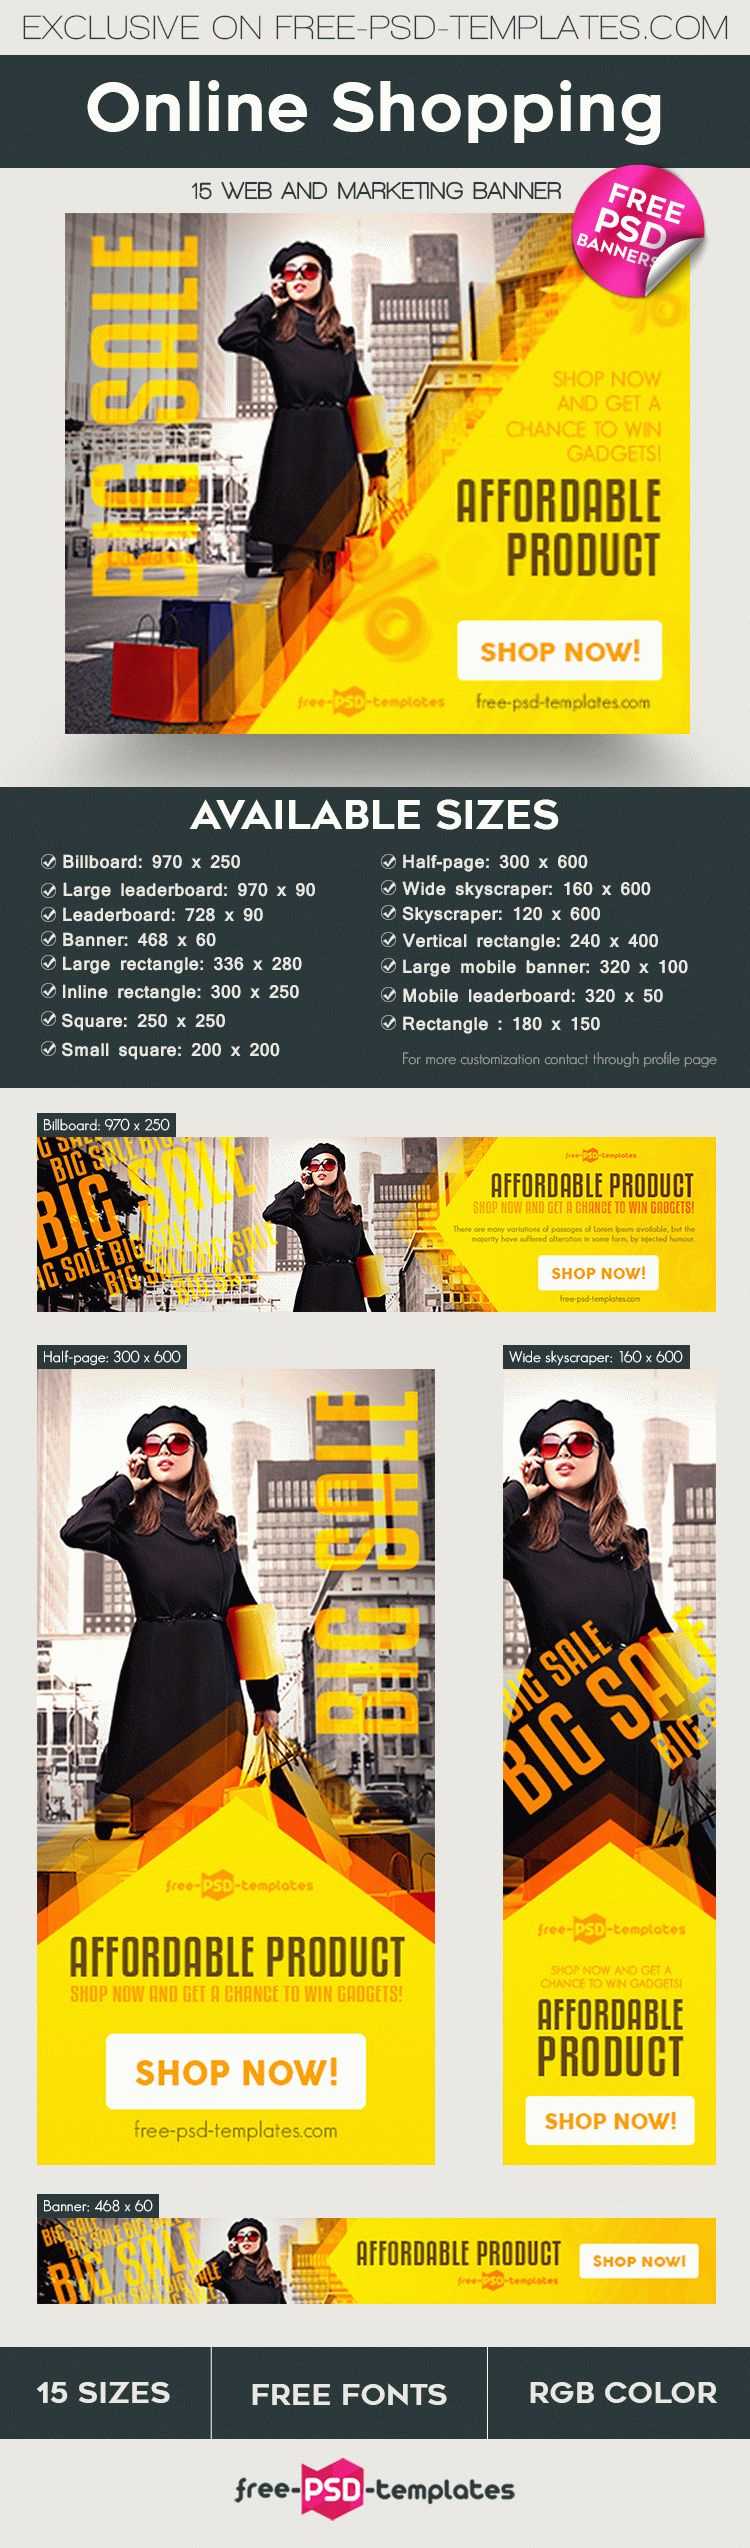 15 Free Online Shopping Banner In Psd | Free Psd Templates Intended For Free Online Banner Templates